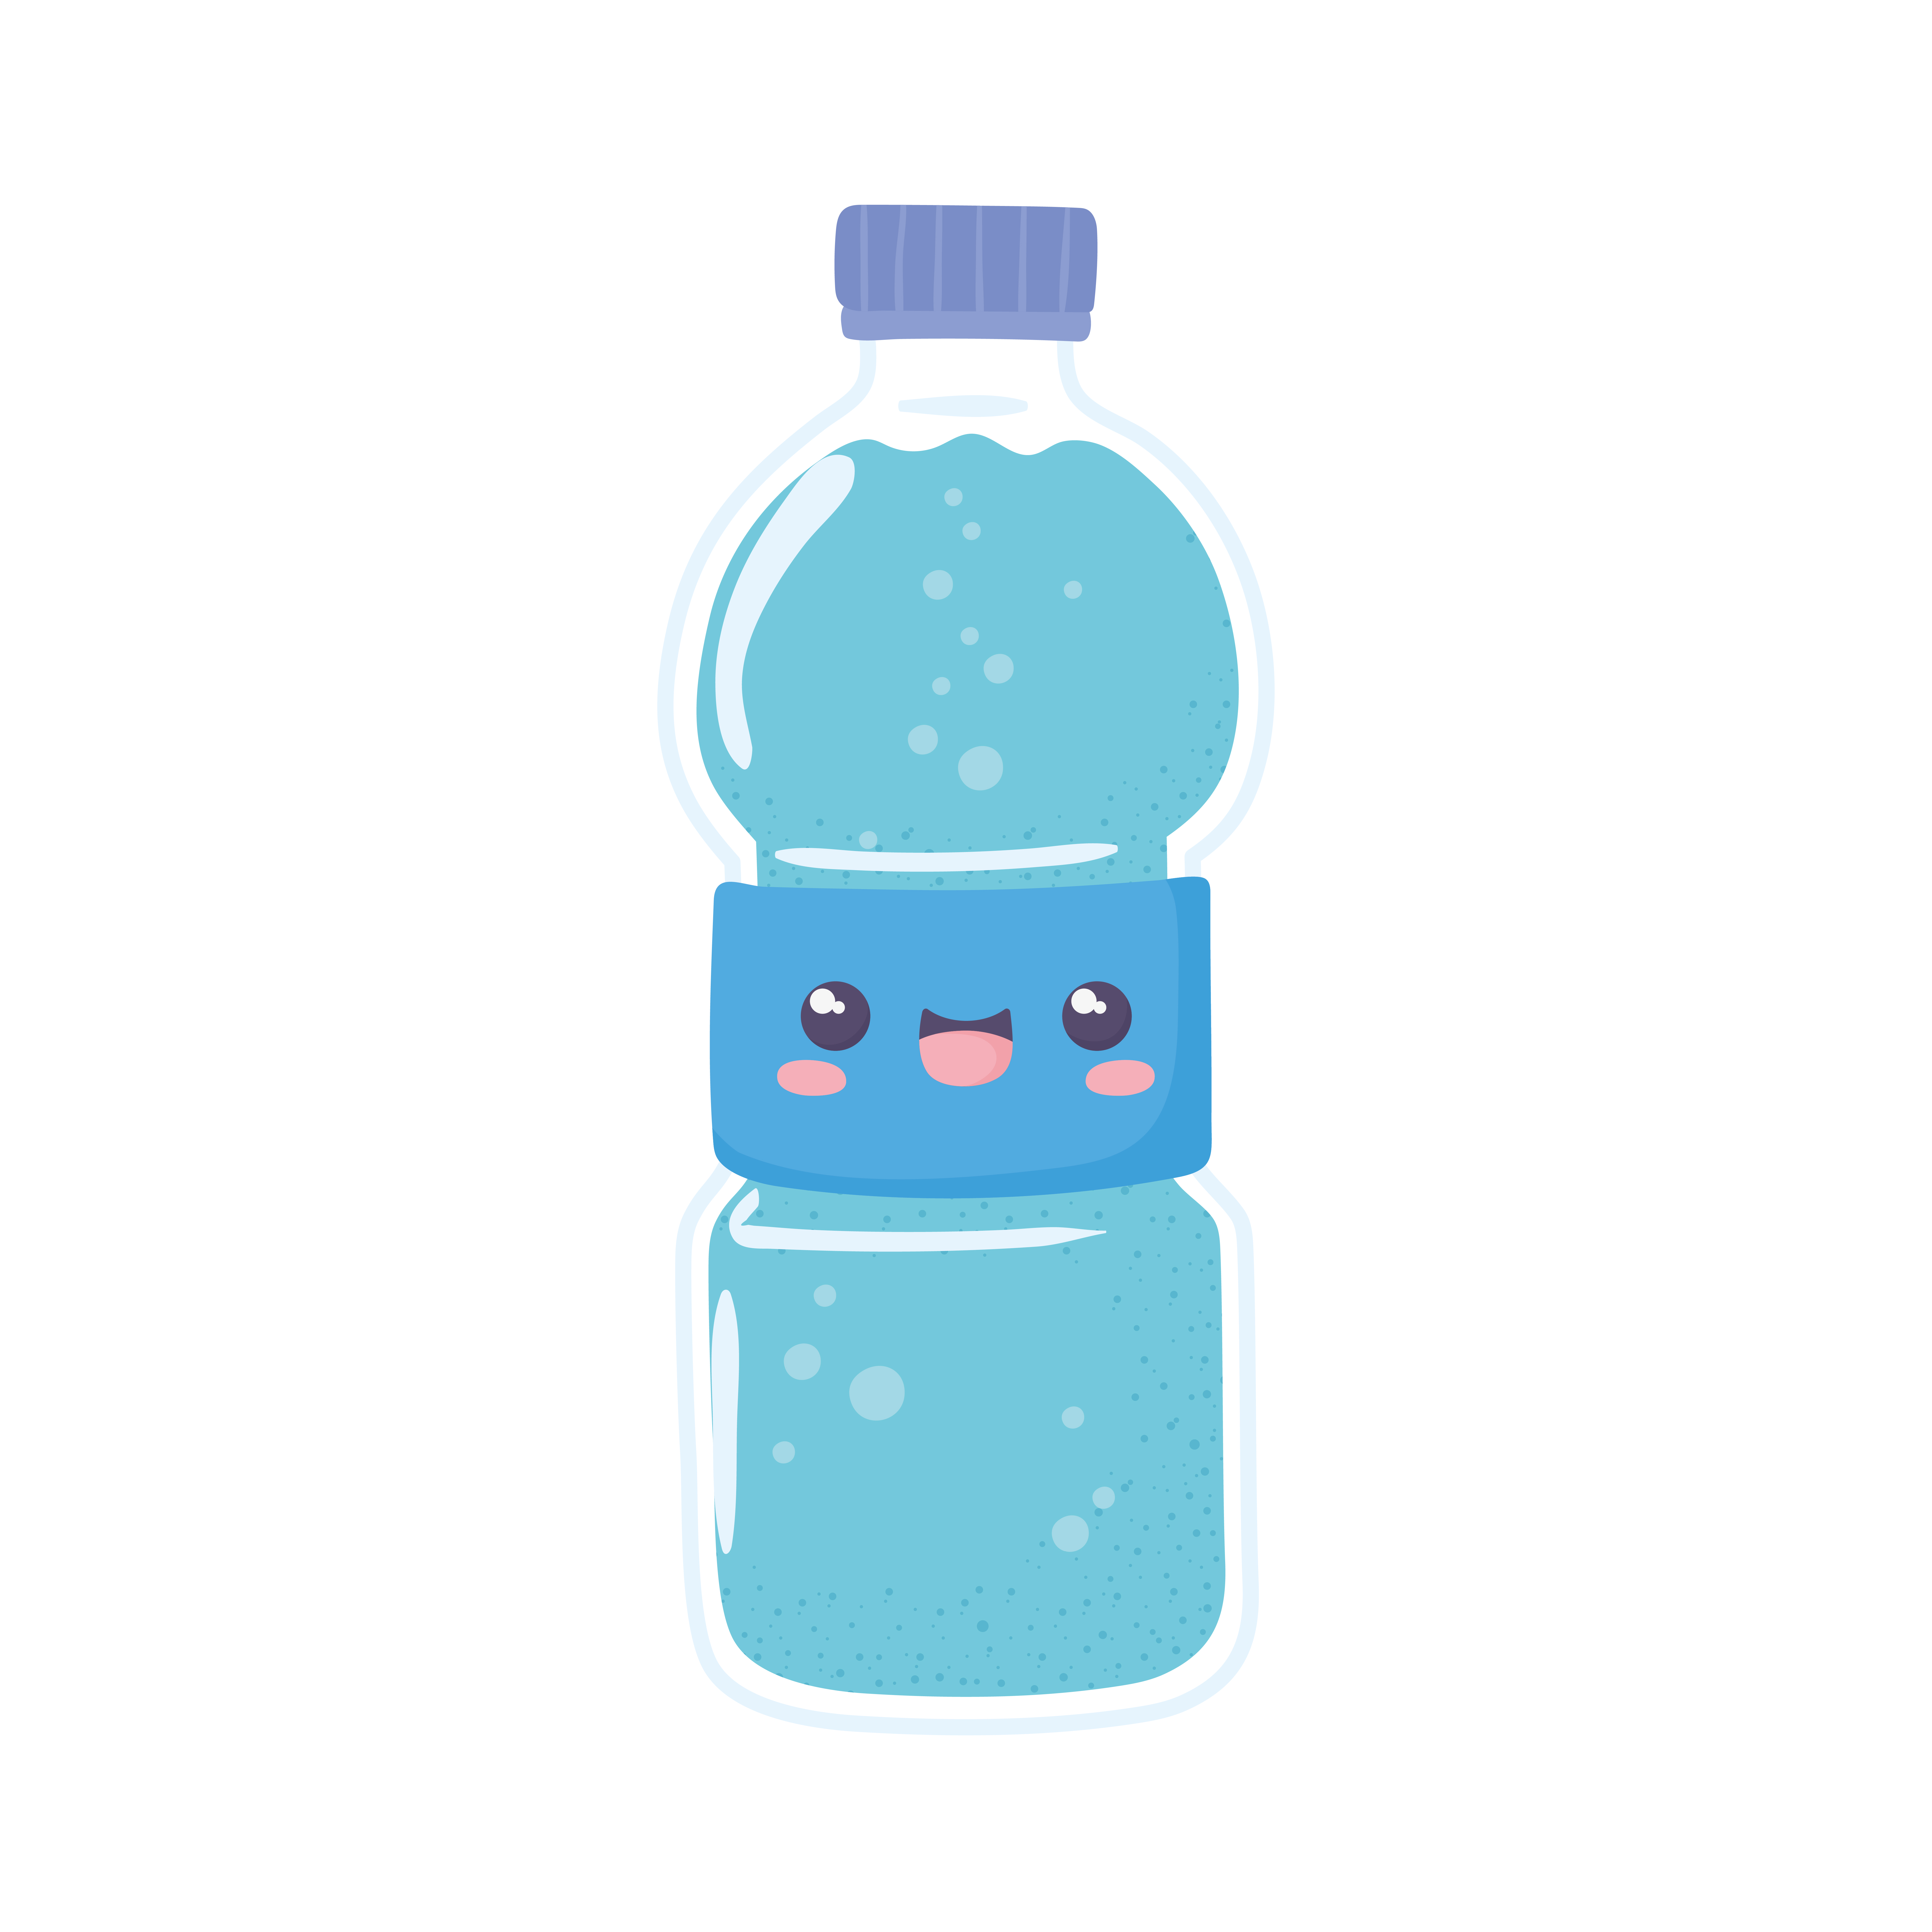 Water Cartoon Vector Art, Icons, and Graphics for Free Download